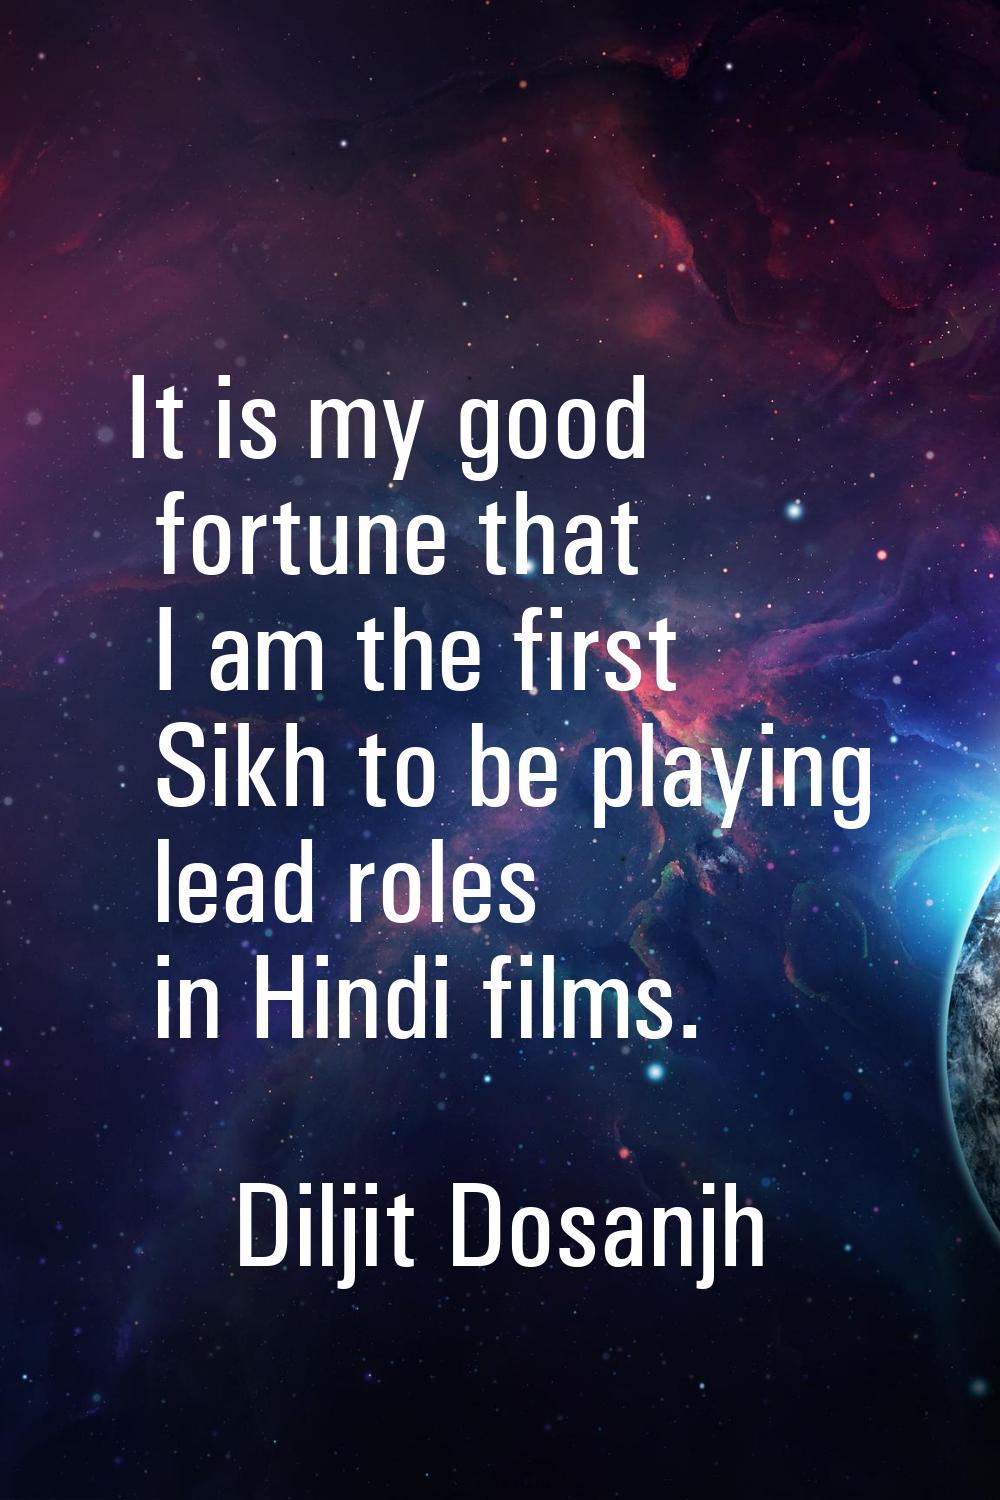 It is my good fortune that I am the first Sikh to be playing lead roles in Hindi films.